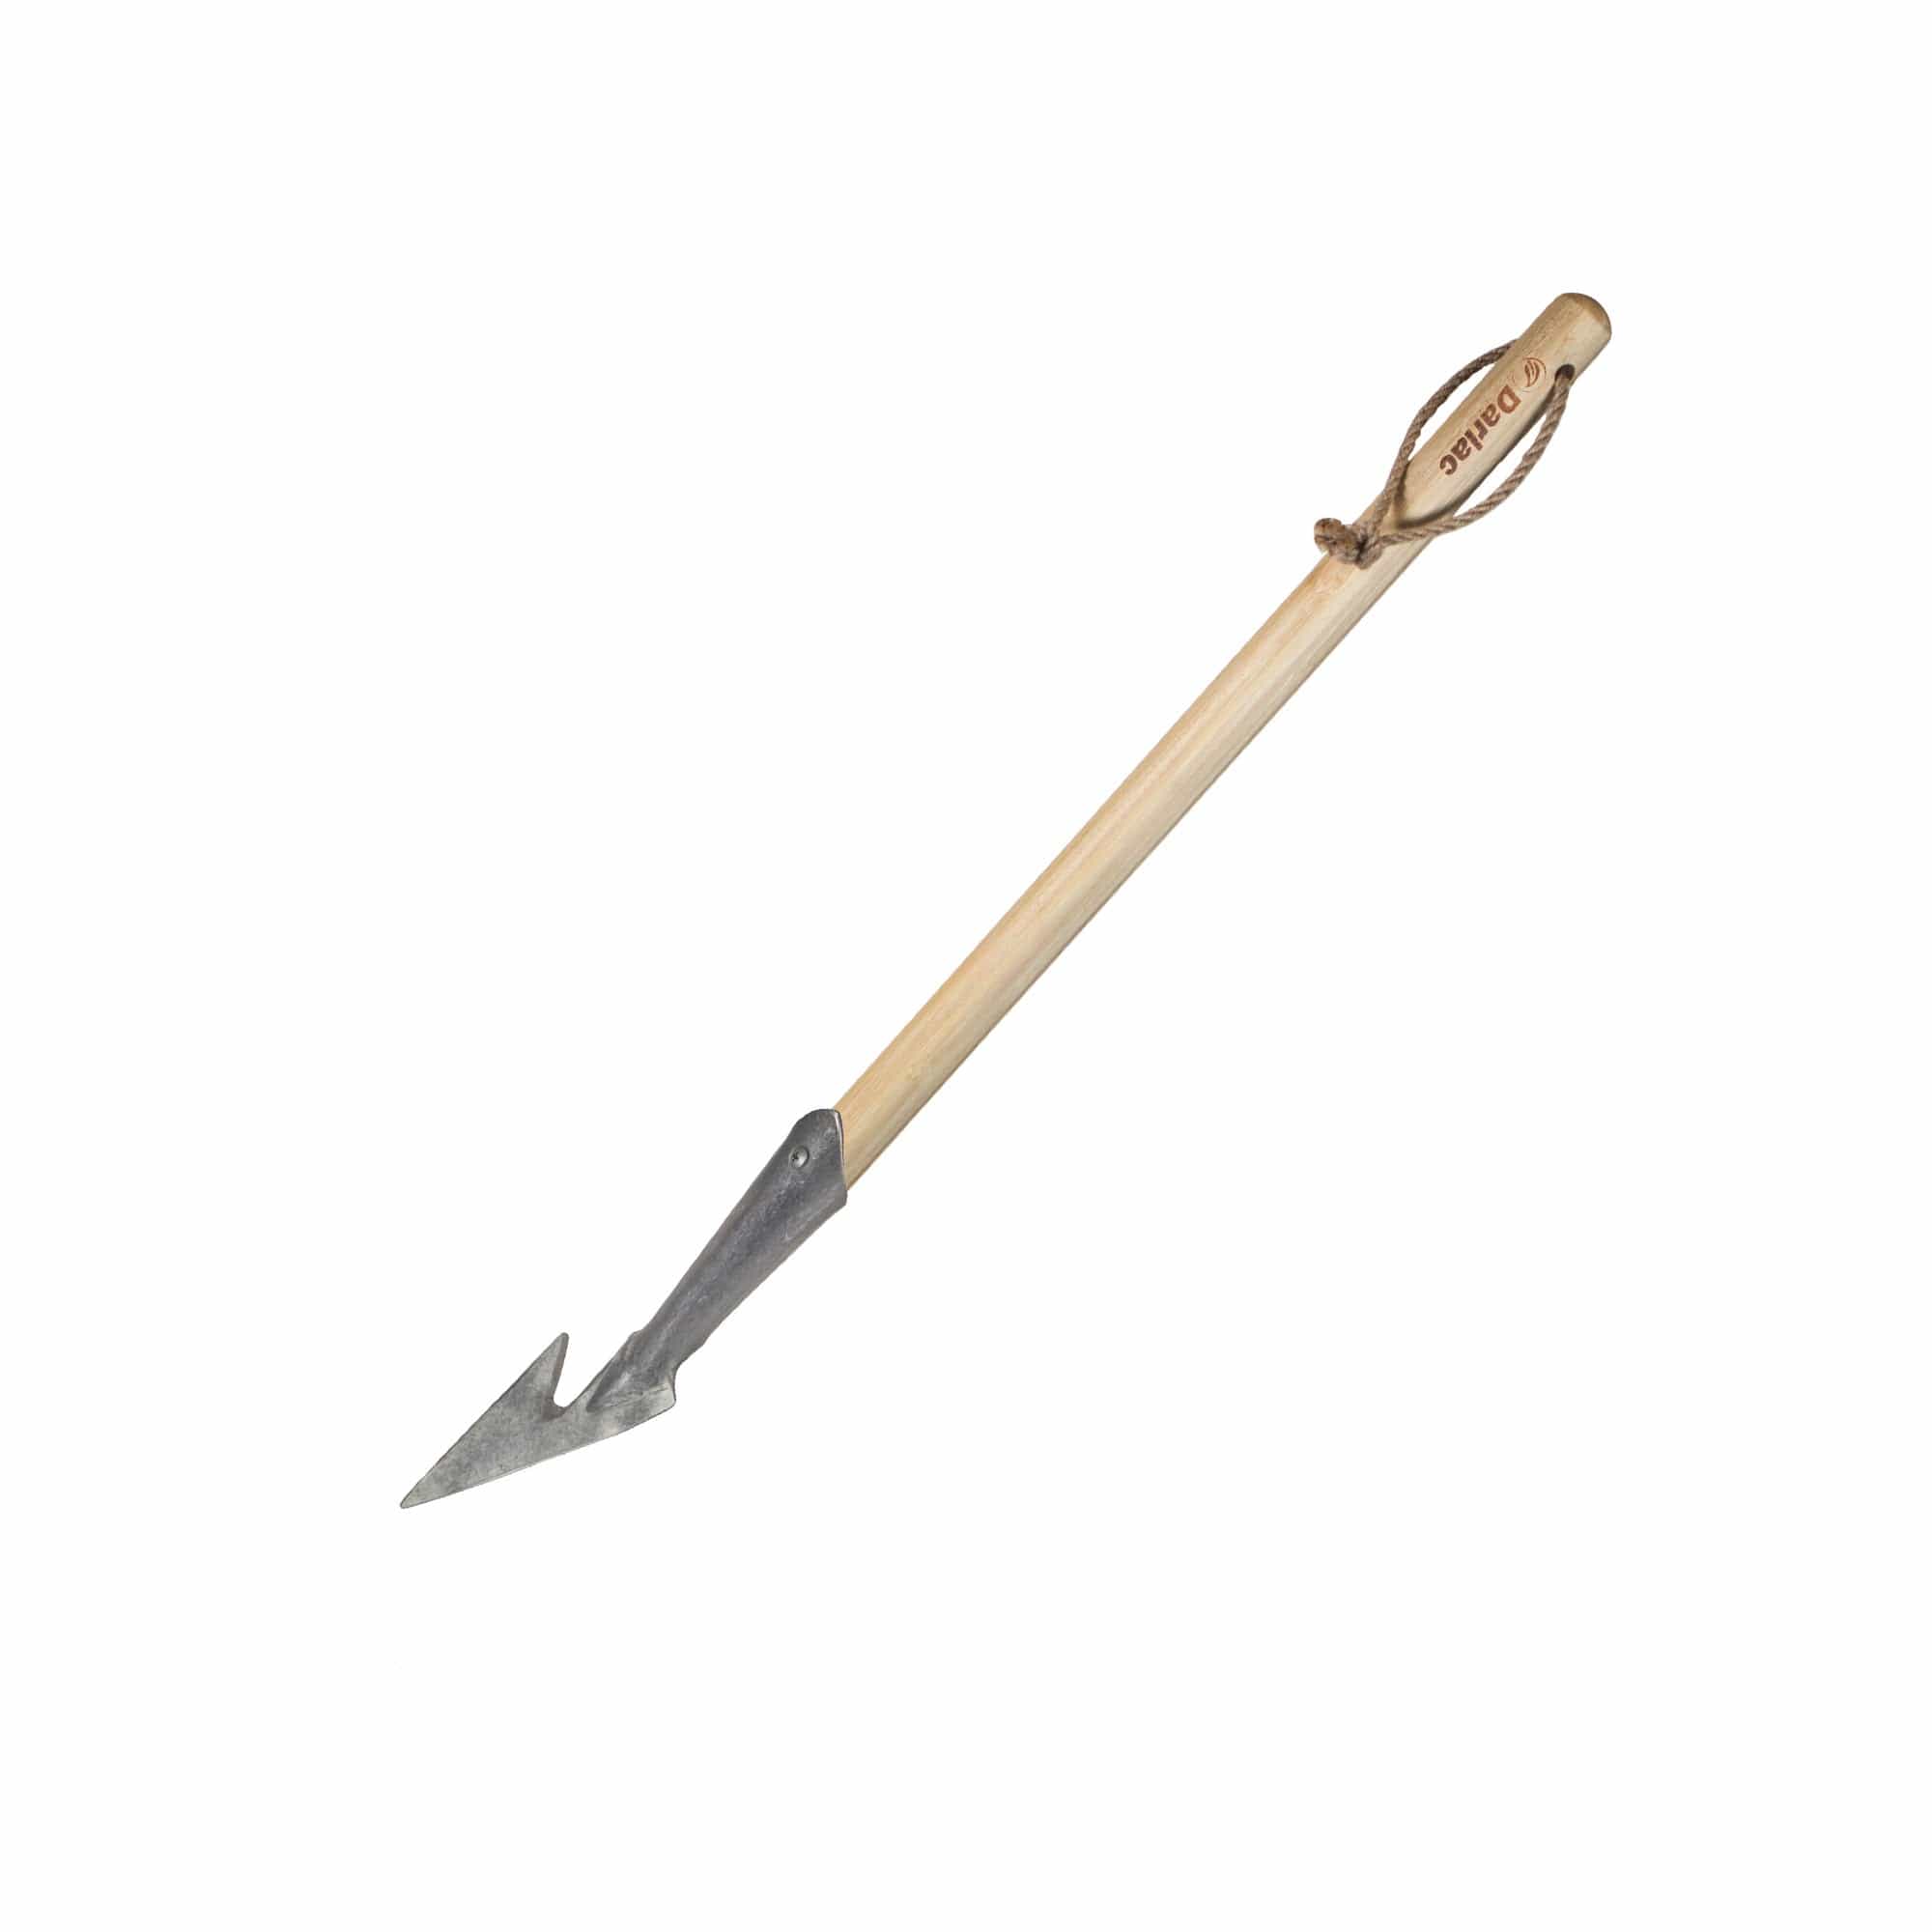 dt-brown HARDWARE Darlac Bamboo Weeding Spear Hoe Short Handle